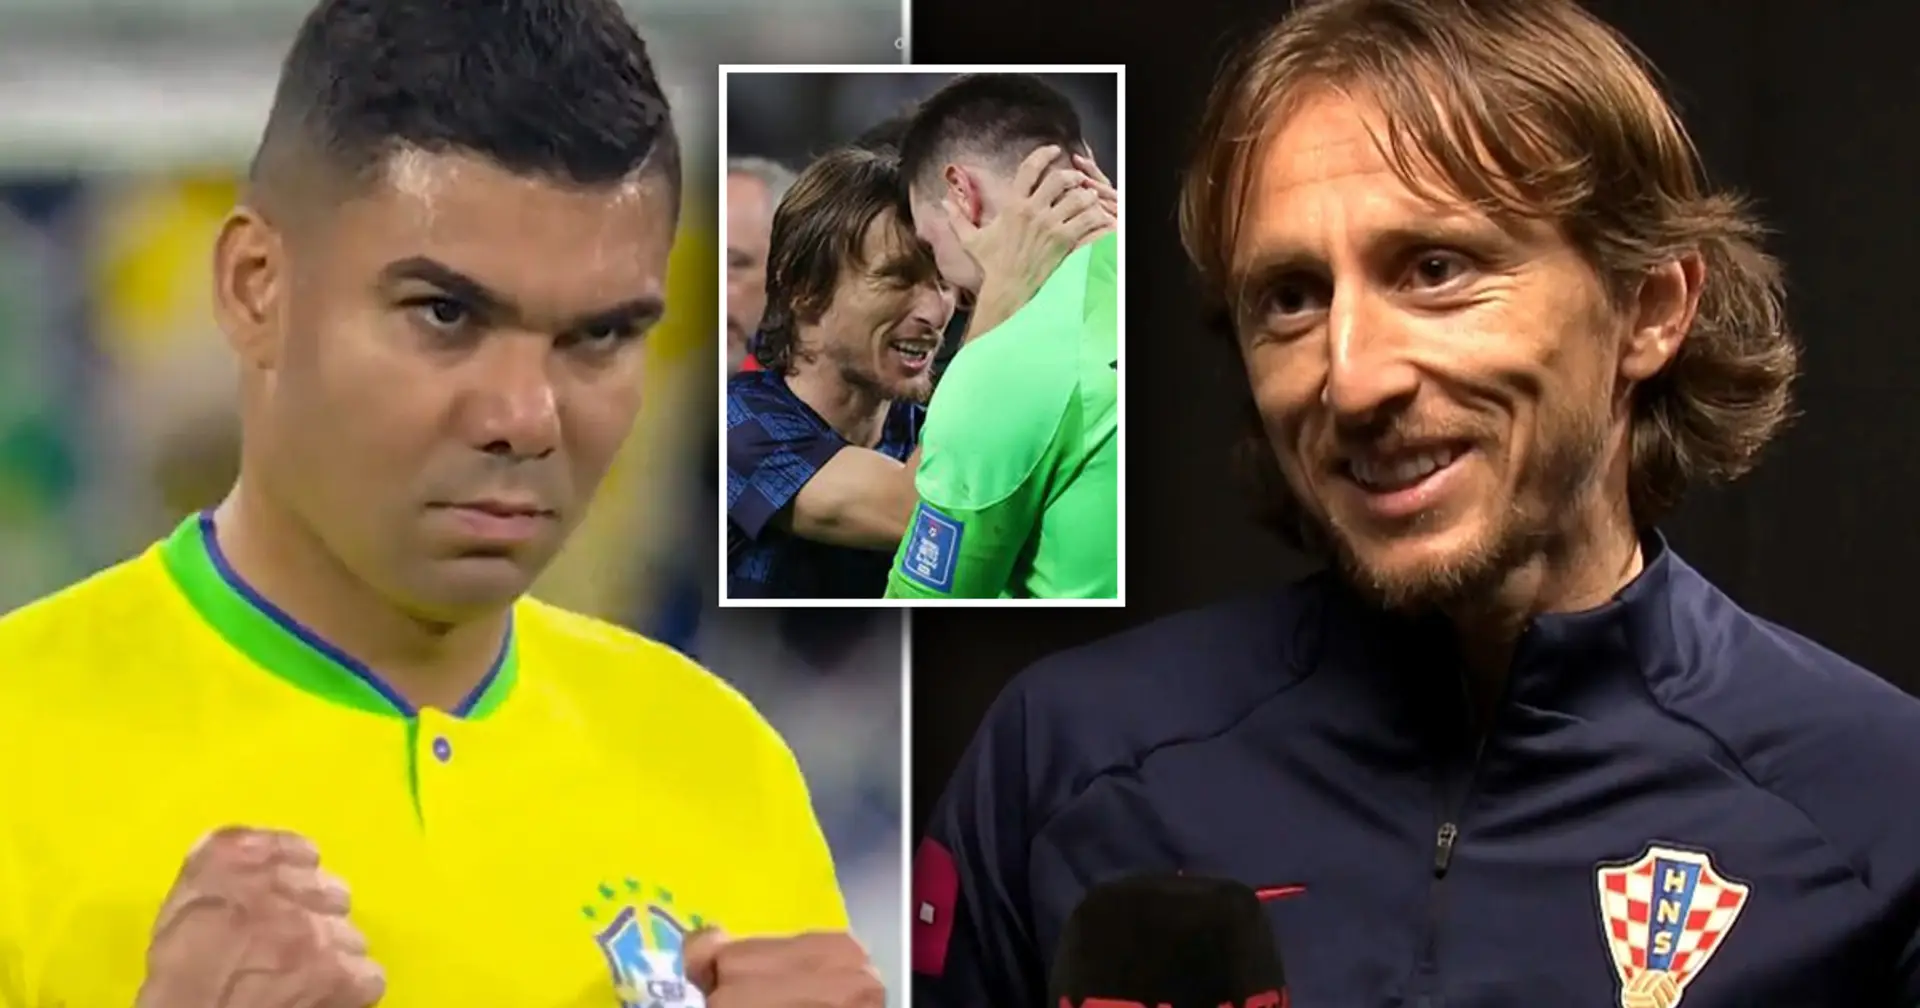 'I told him about one of the players': Modric reveals how he helped Livakovic in penalty shootout